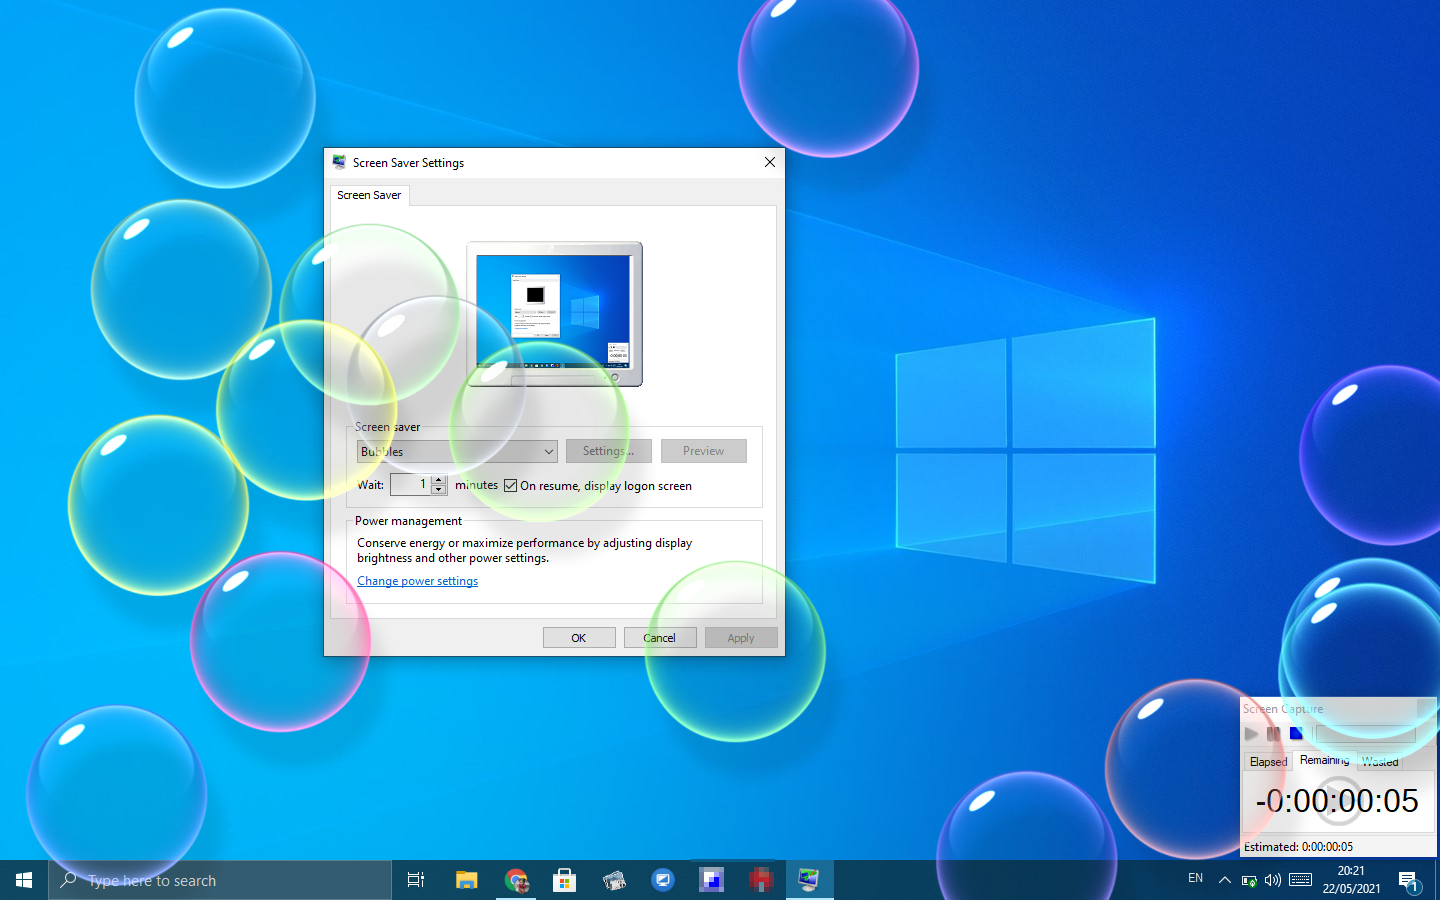 How To Enable Or Disable Screen Saver In Windows 10 Gear Up Windows